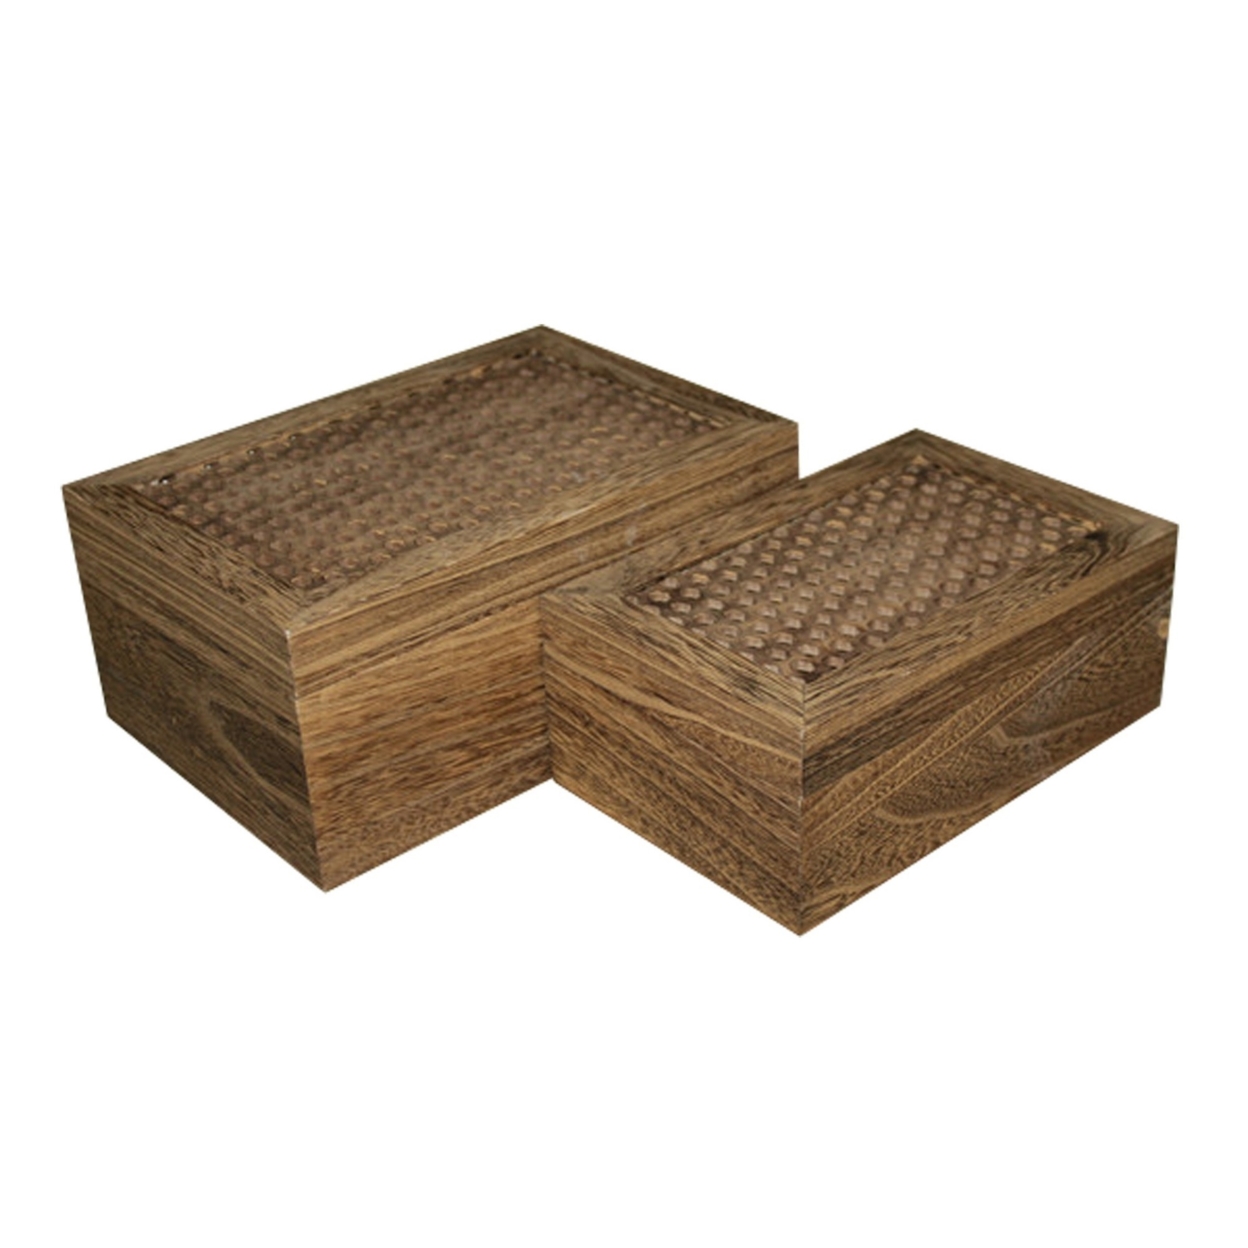 Wooden Storage Box With Intricately Carved Lidded Top, Set Of 2, Brown- Saltoro Sherpi